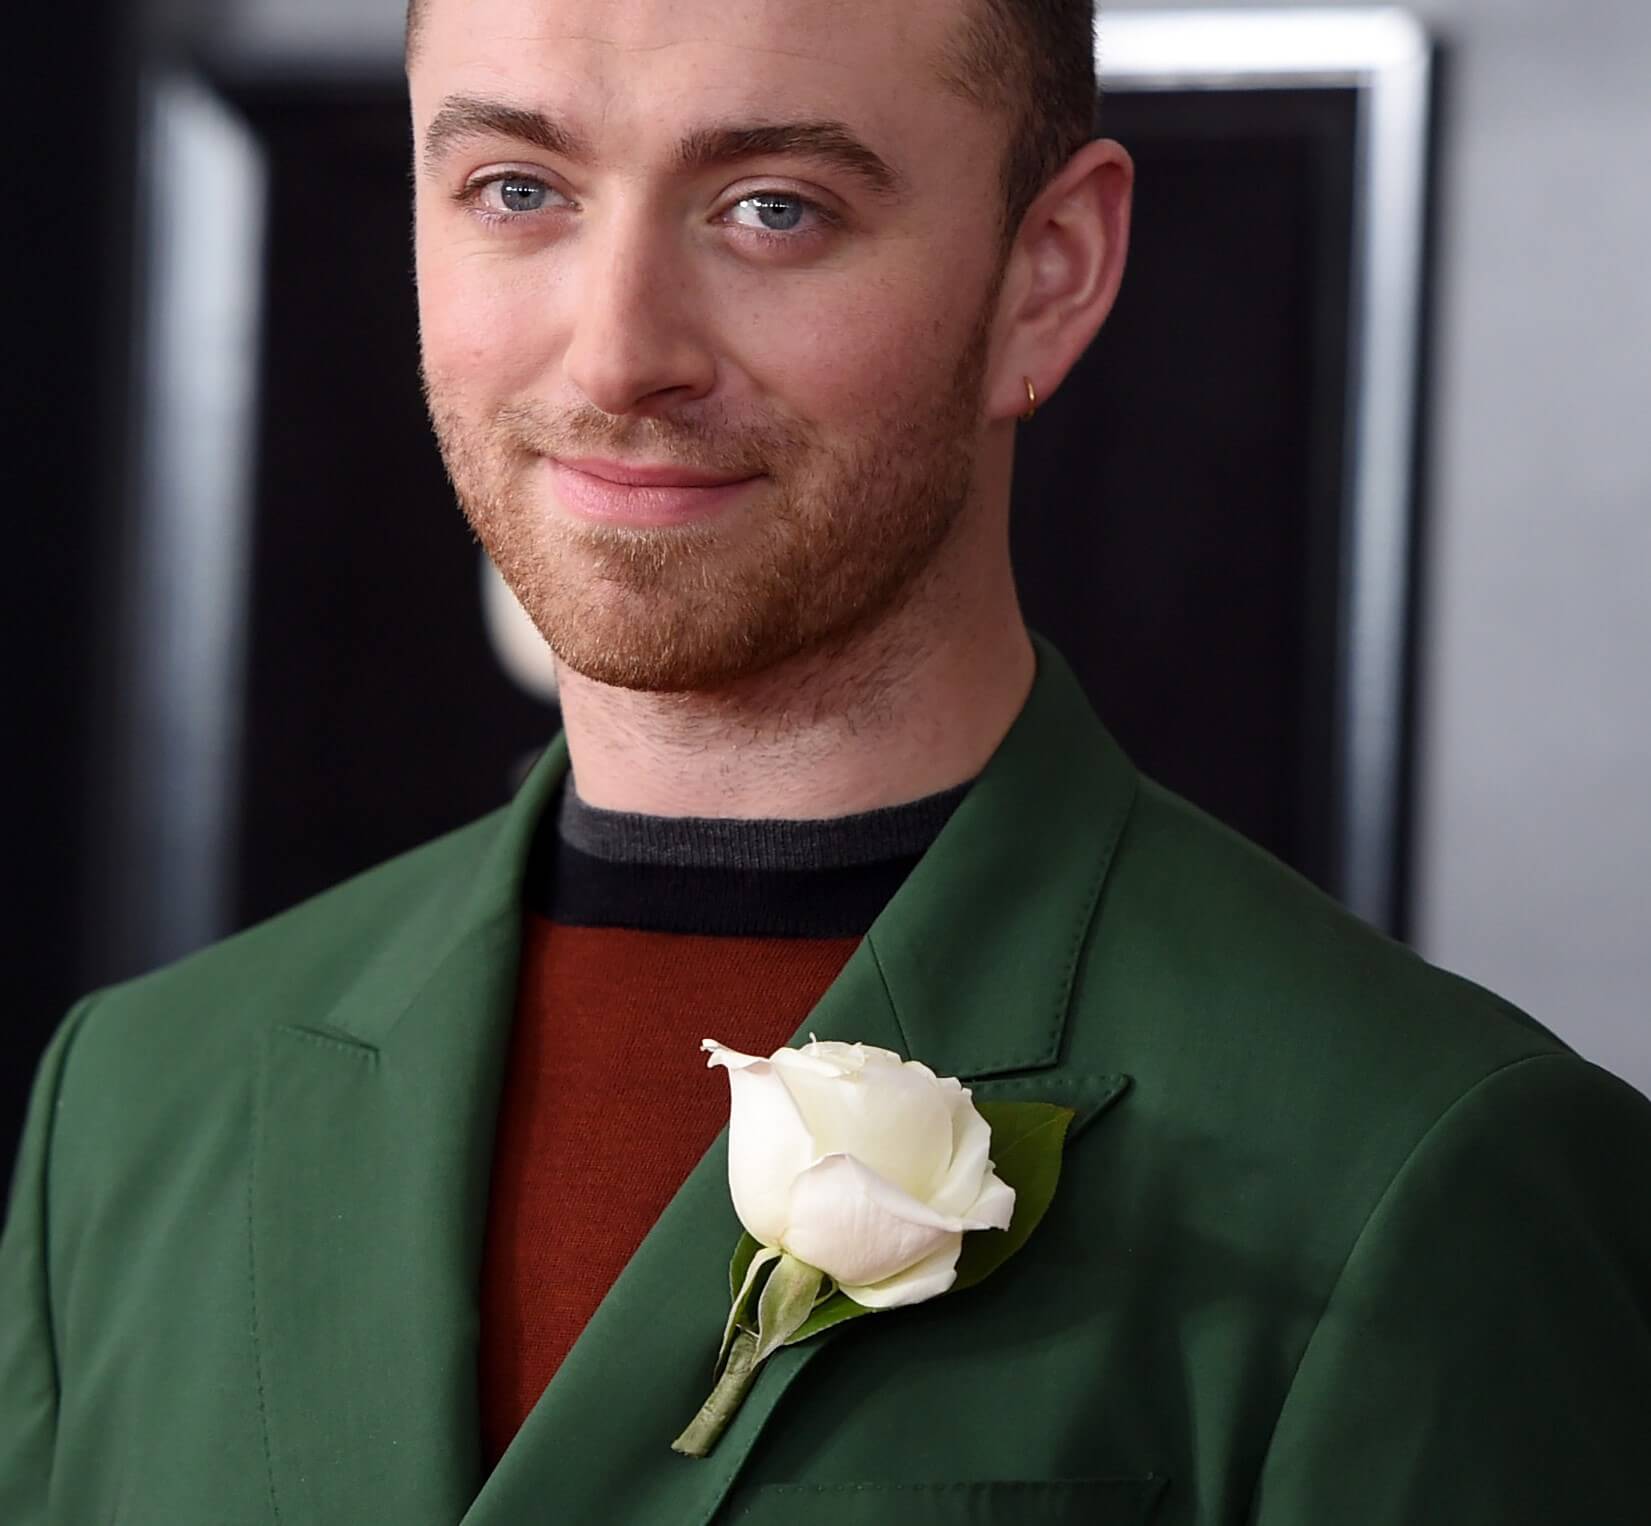 "Stay with Me" singer Sam Smith wearing green